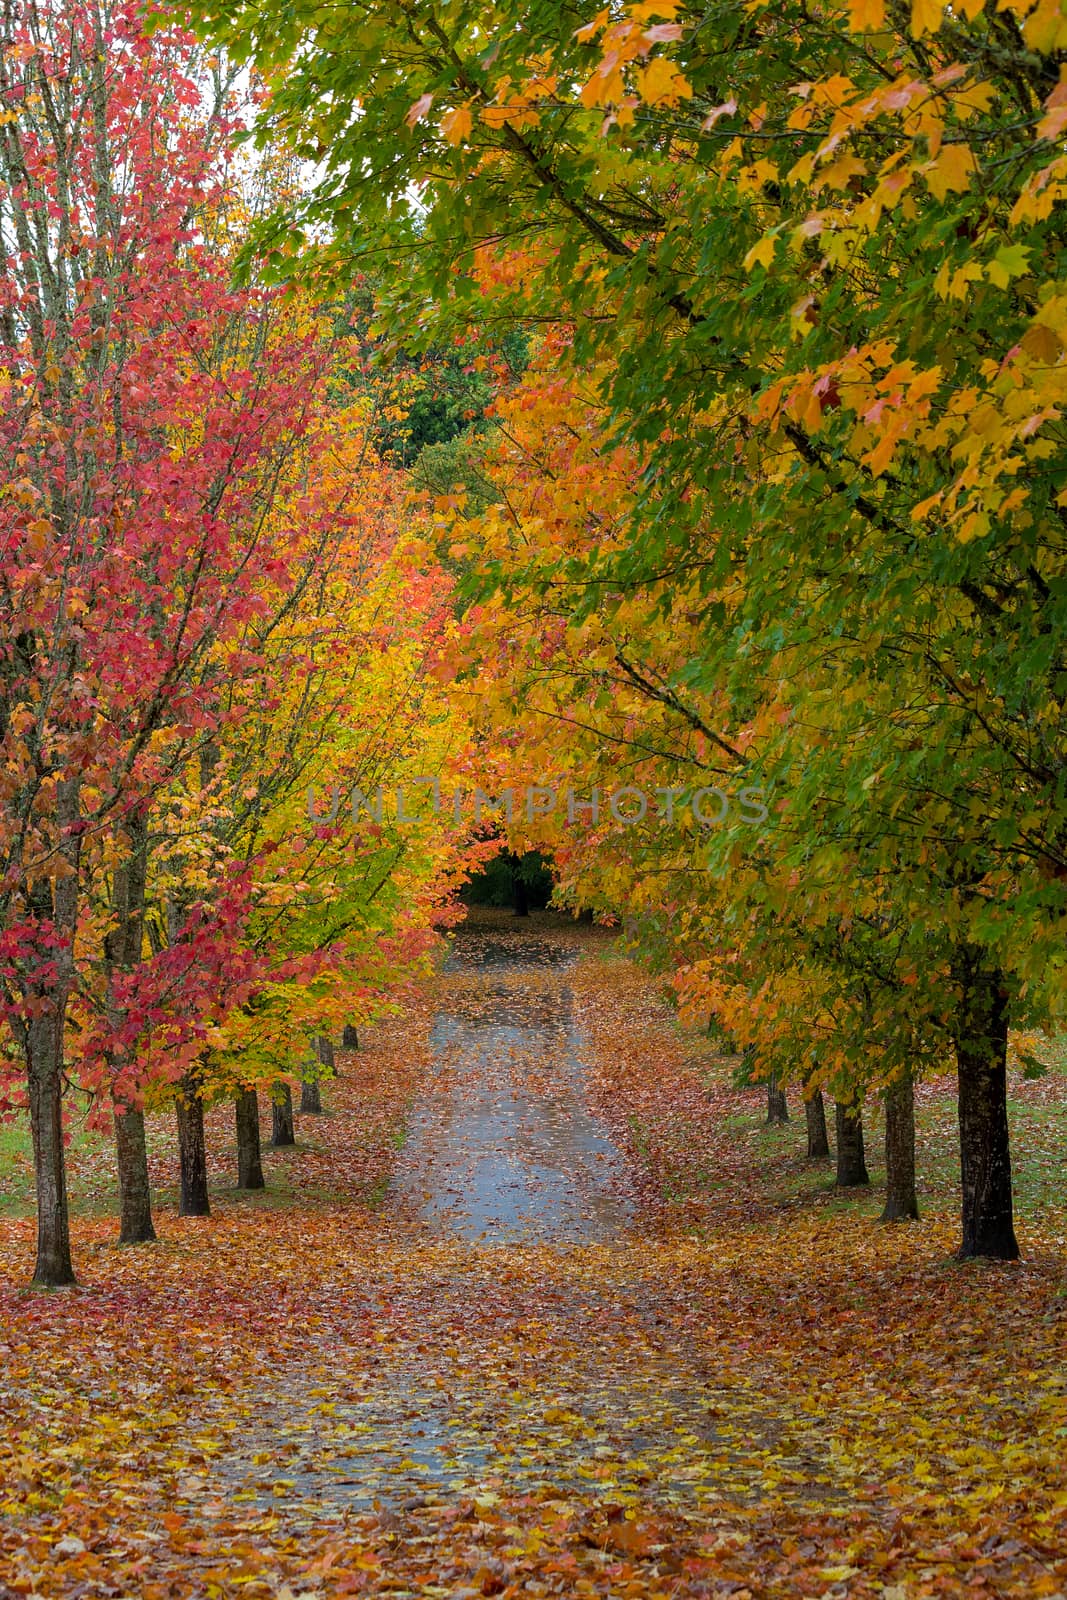 Path Lined with Maple Trees in Fall Season by jpldesigns